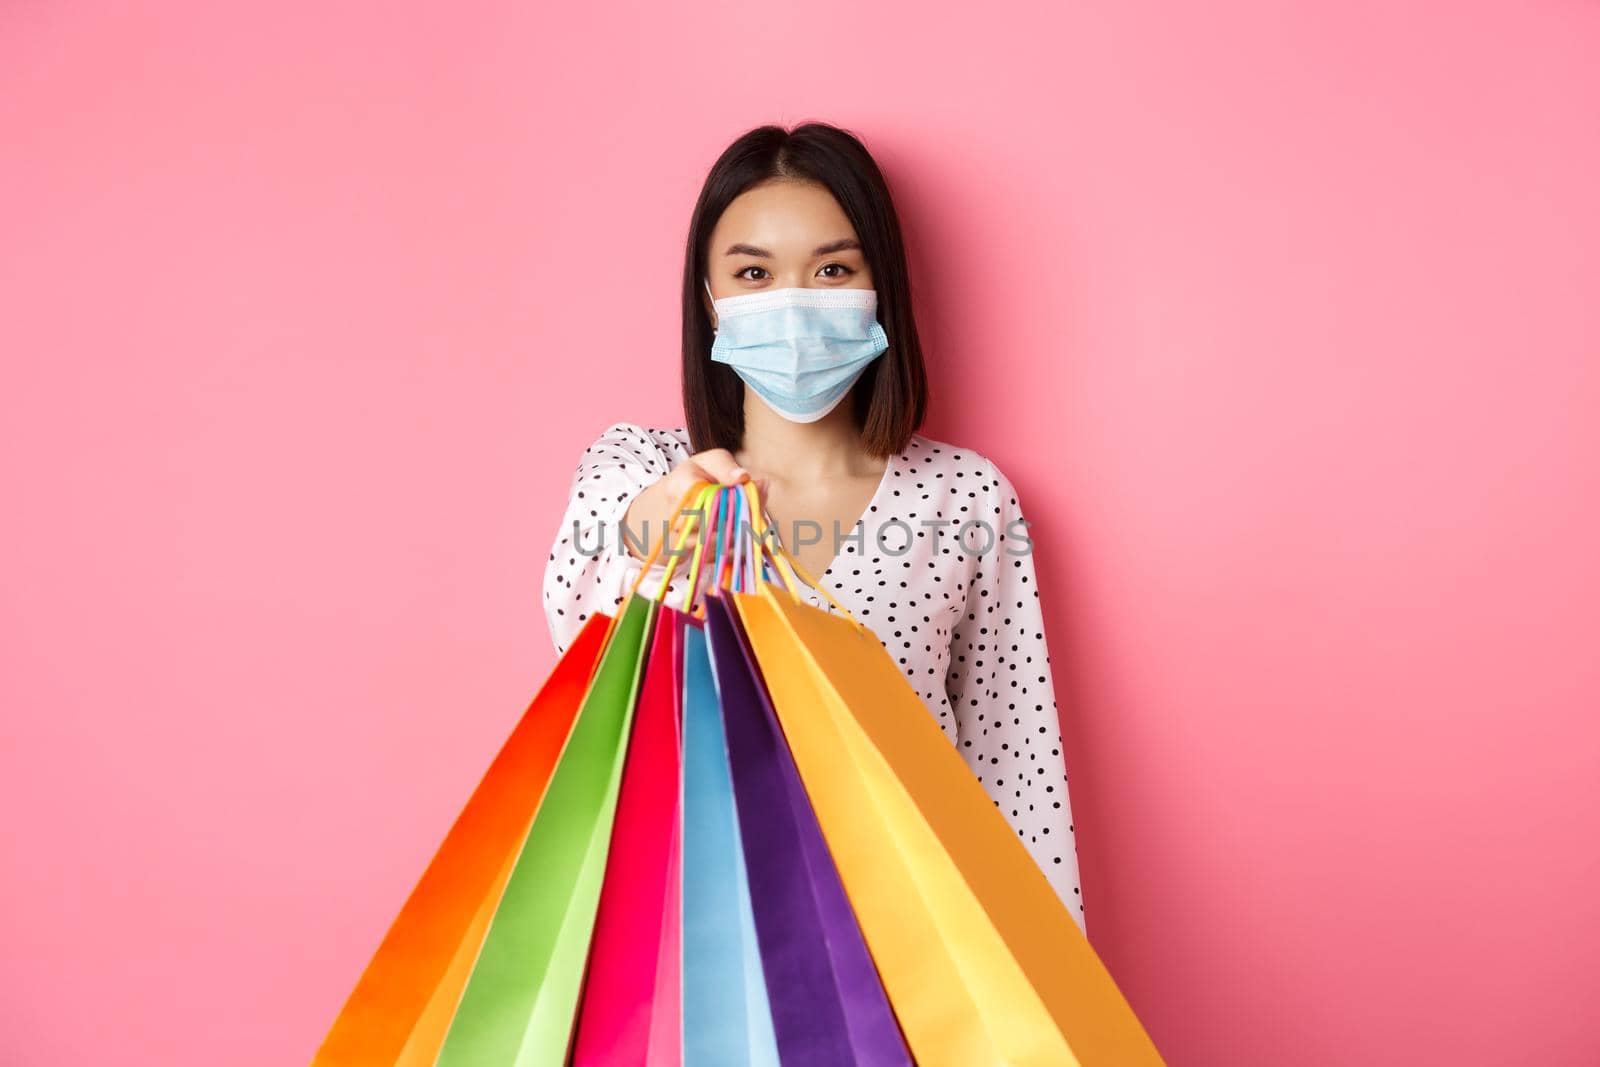 Covid-19, pandemic and lifestyle concept. Beautiful asian woman in face mask giving shopping bags, social distance in store, standing over pink background.